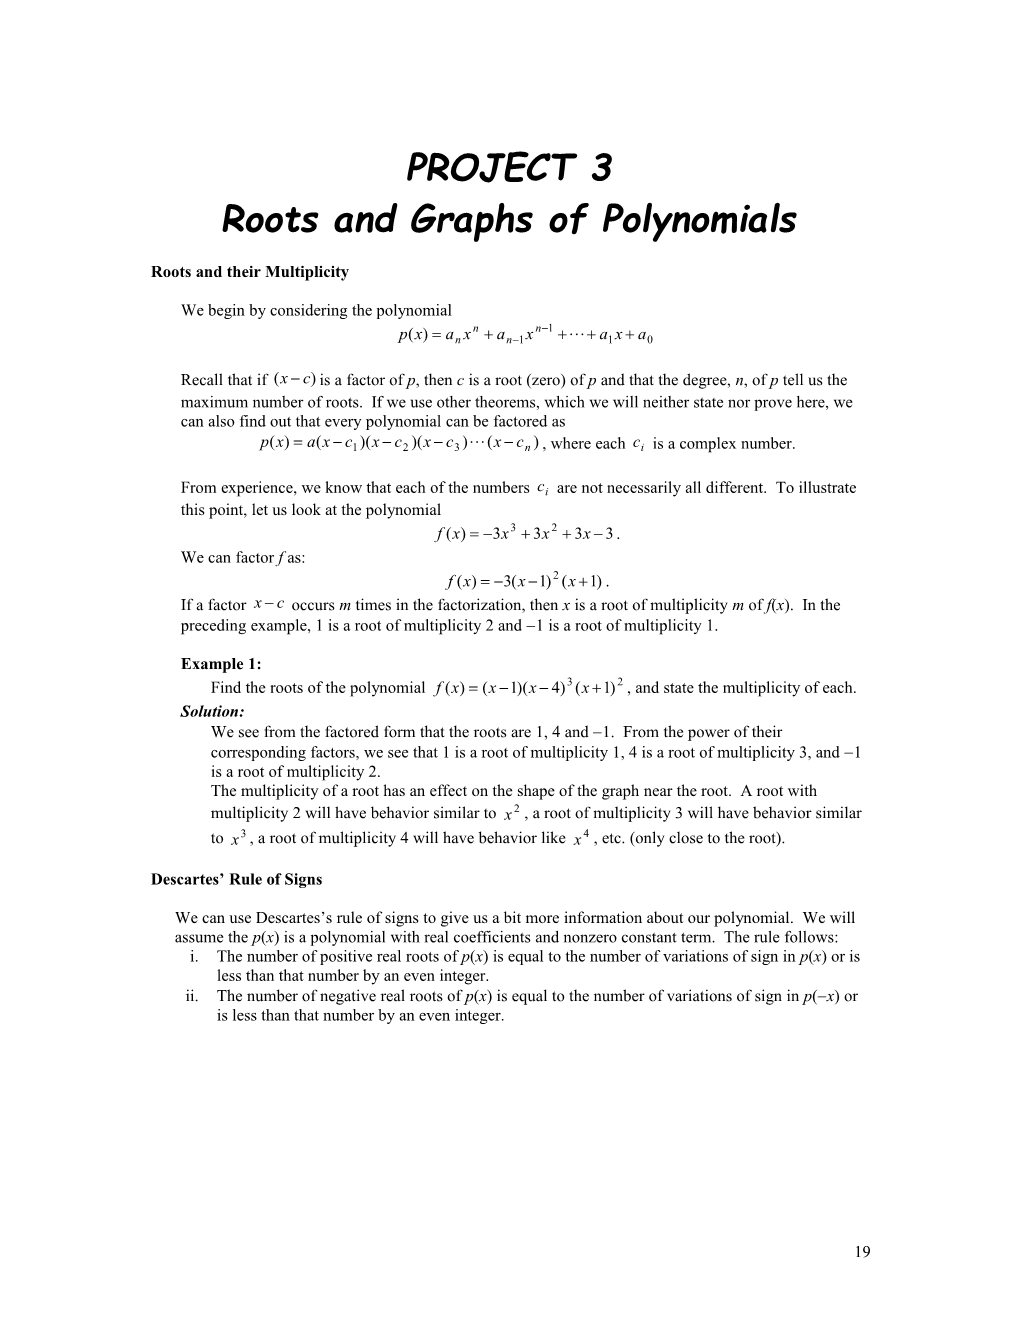 Roots and Graphs of Polynomials